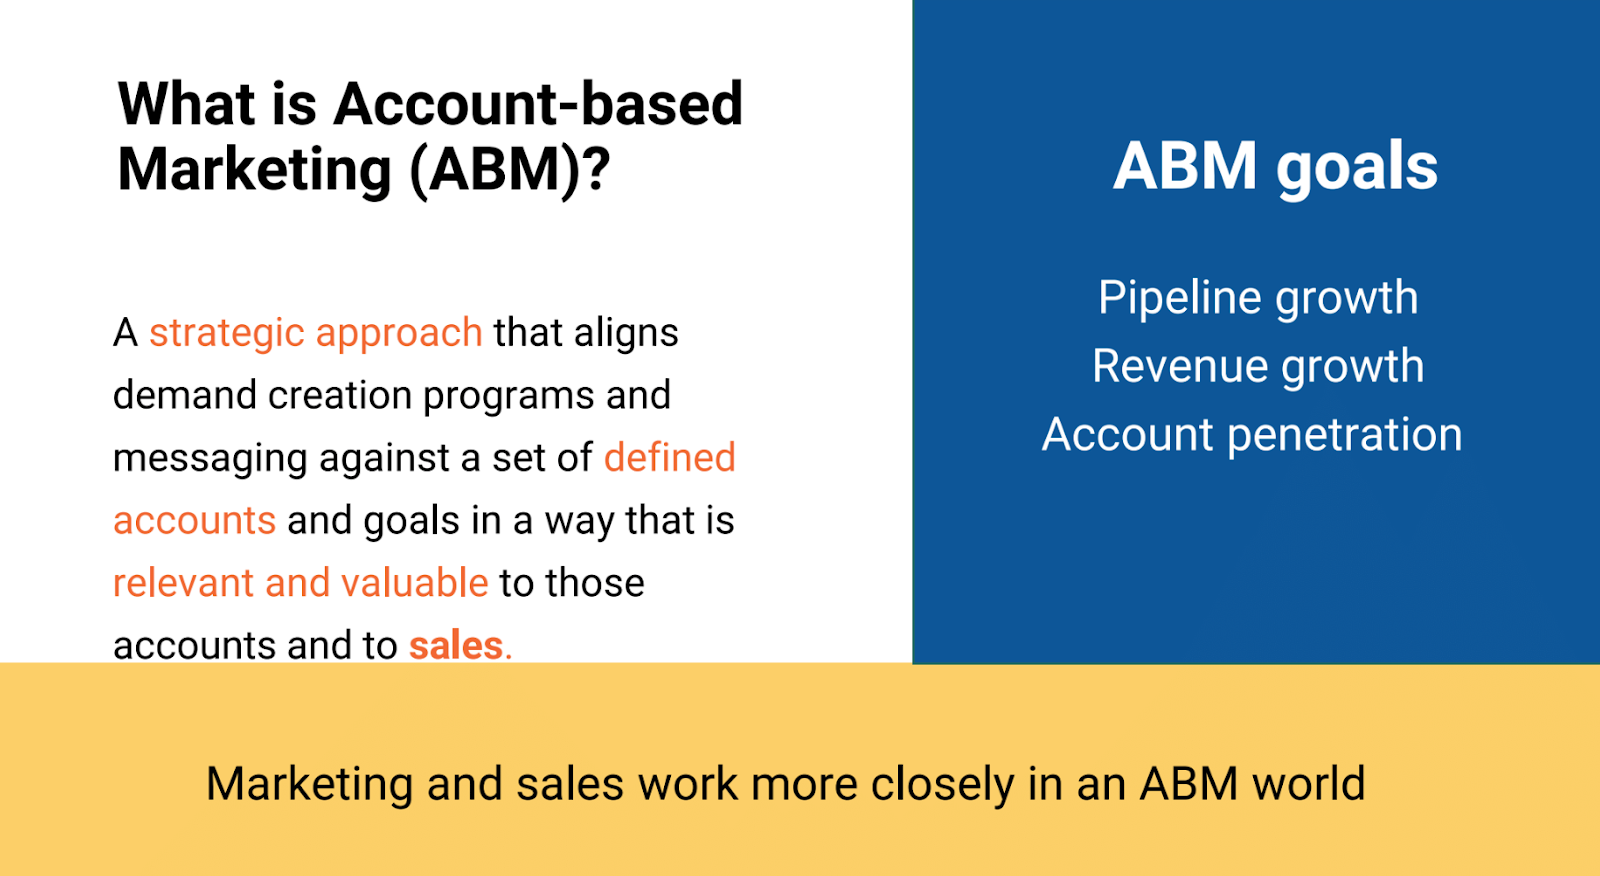 What is ABM?